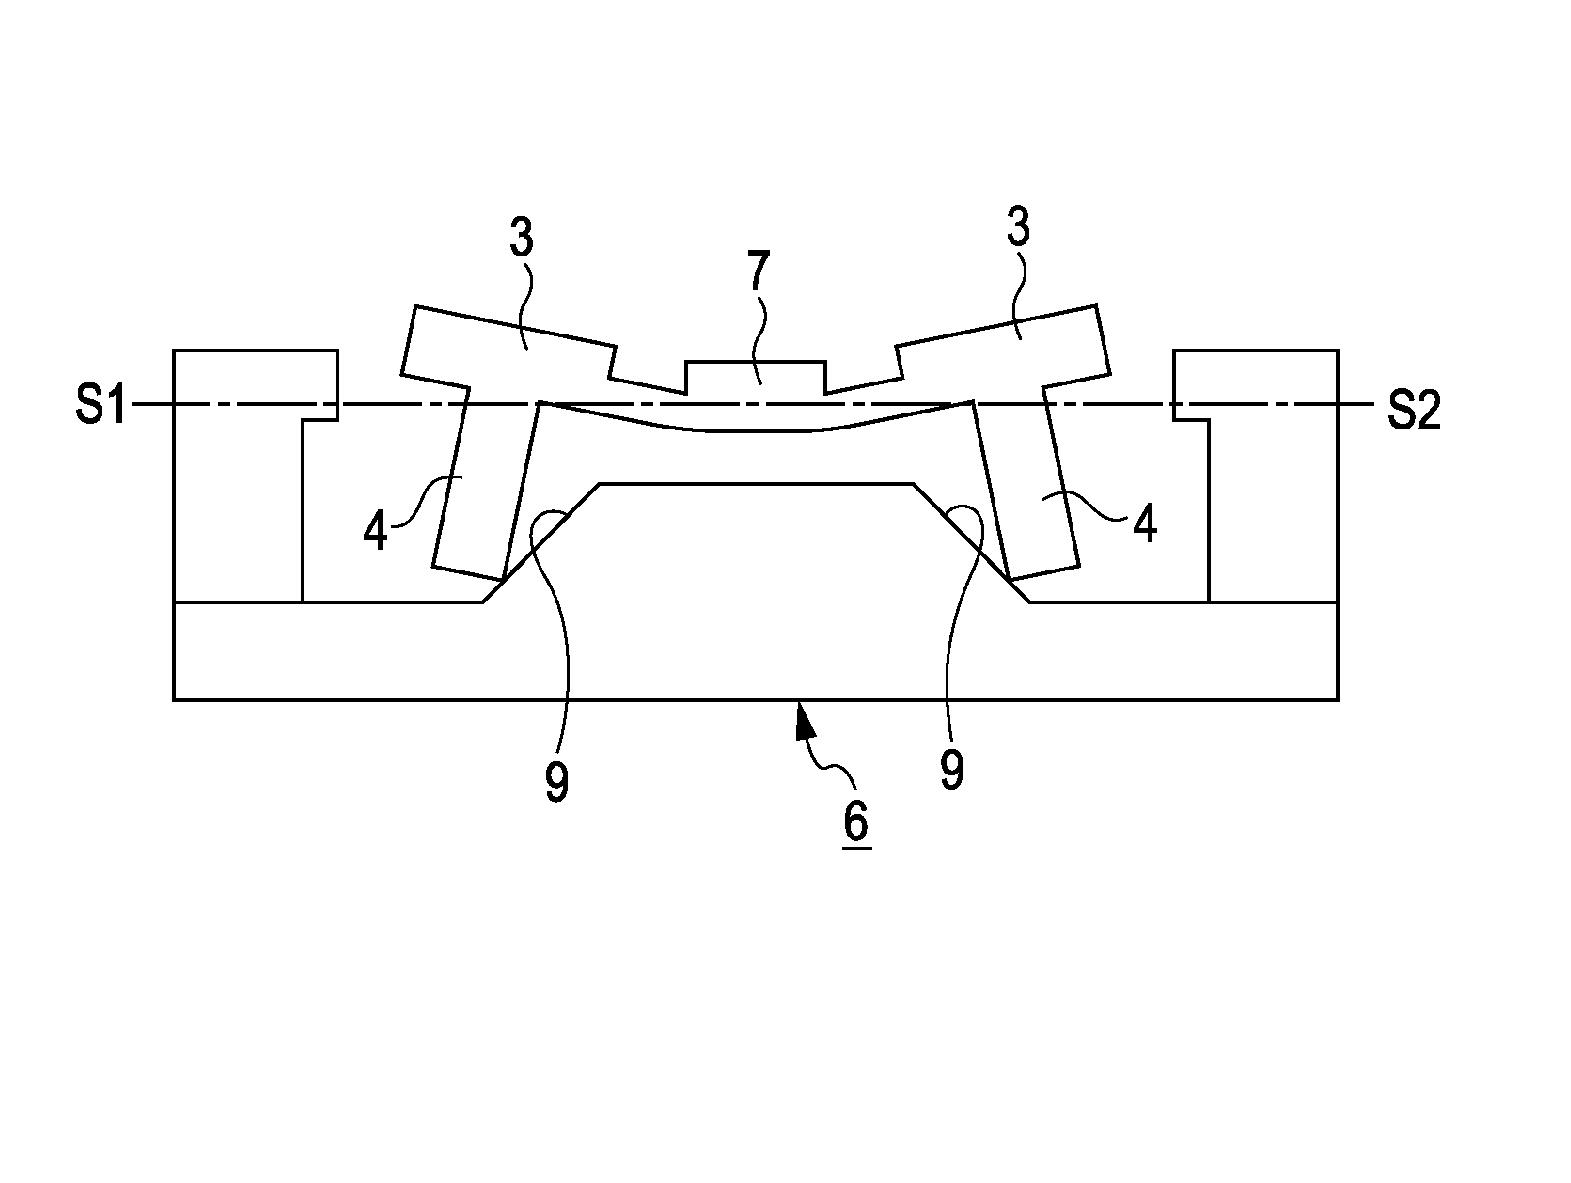 Micro-structure fabrication method